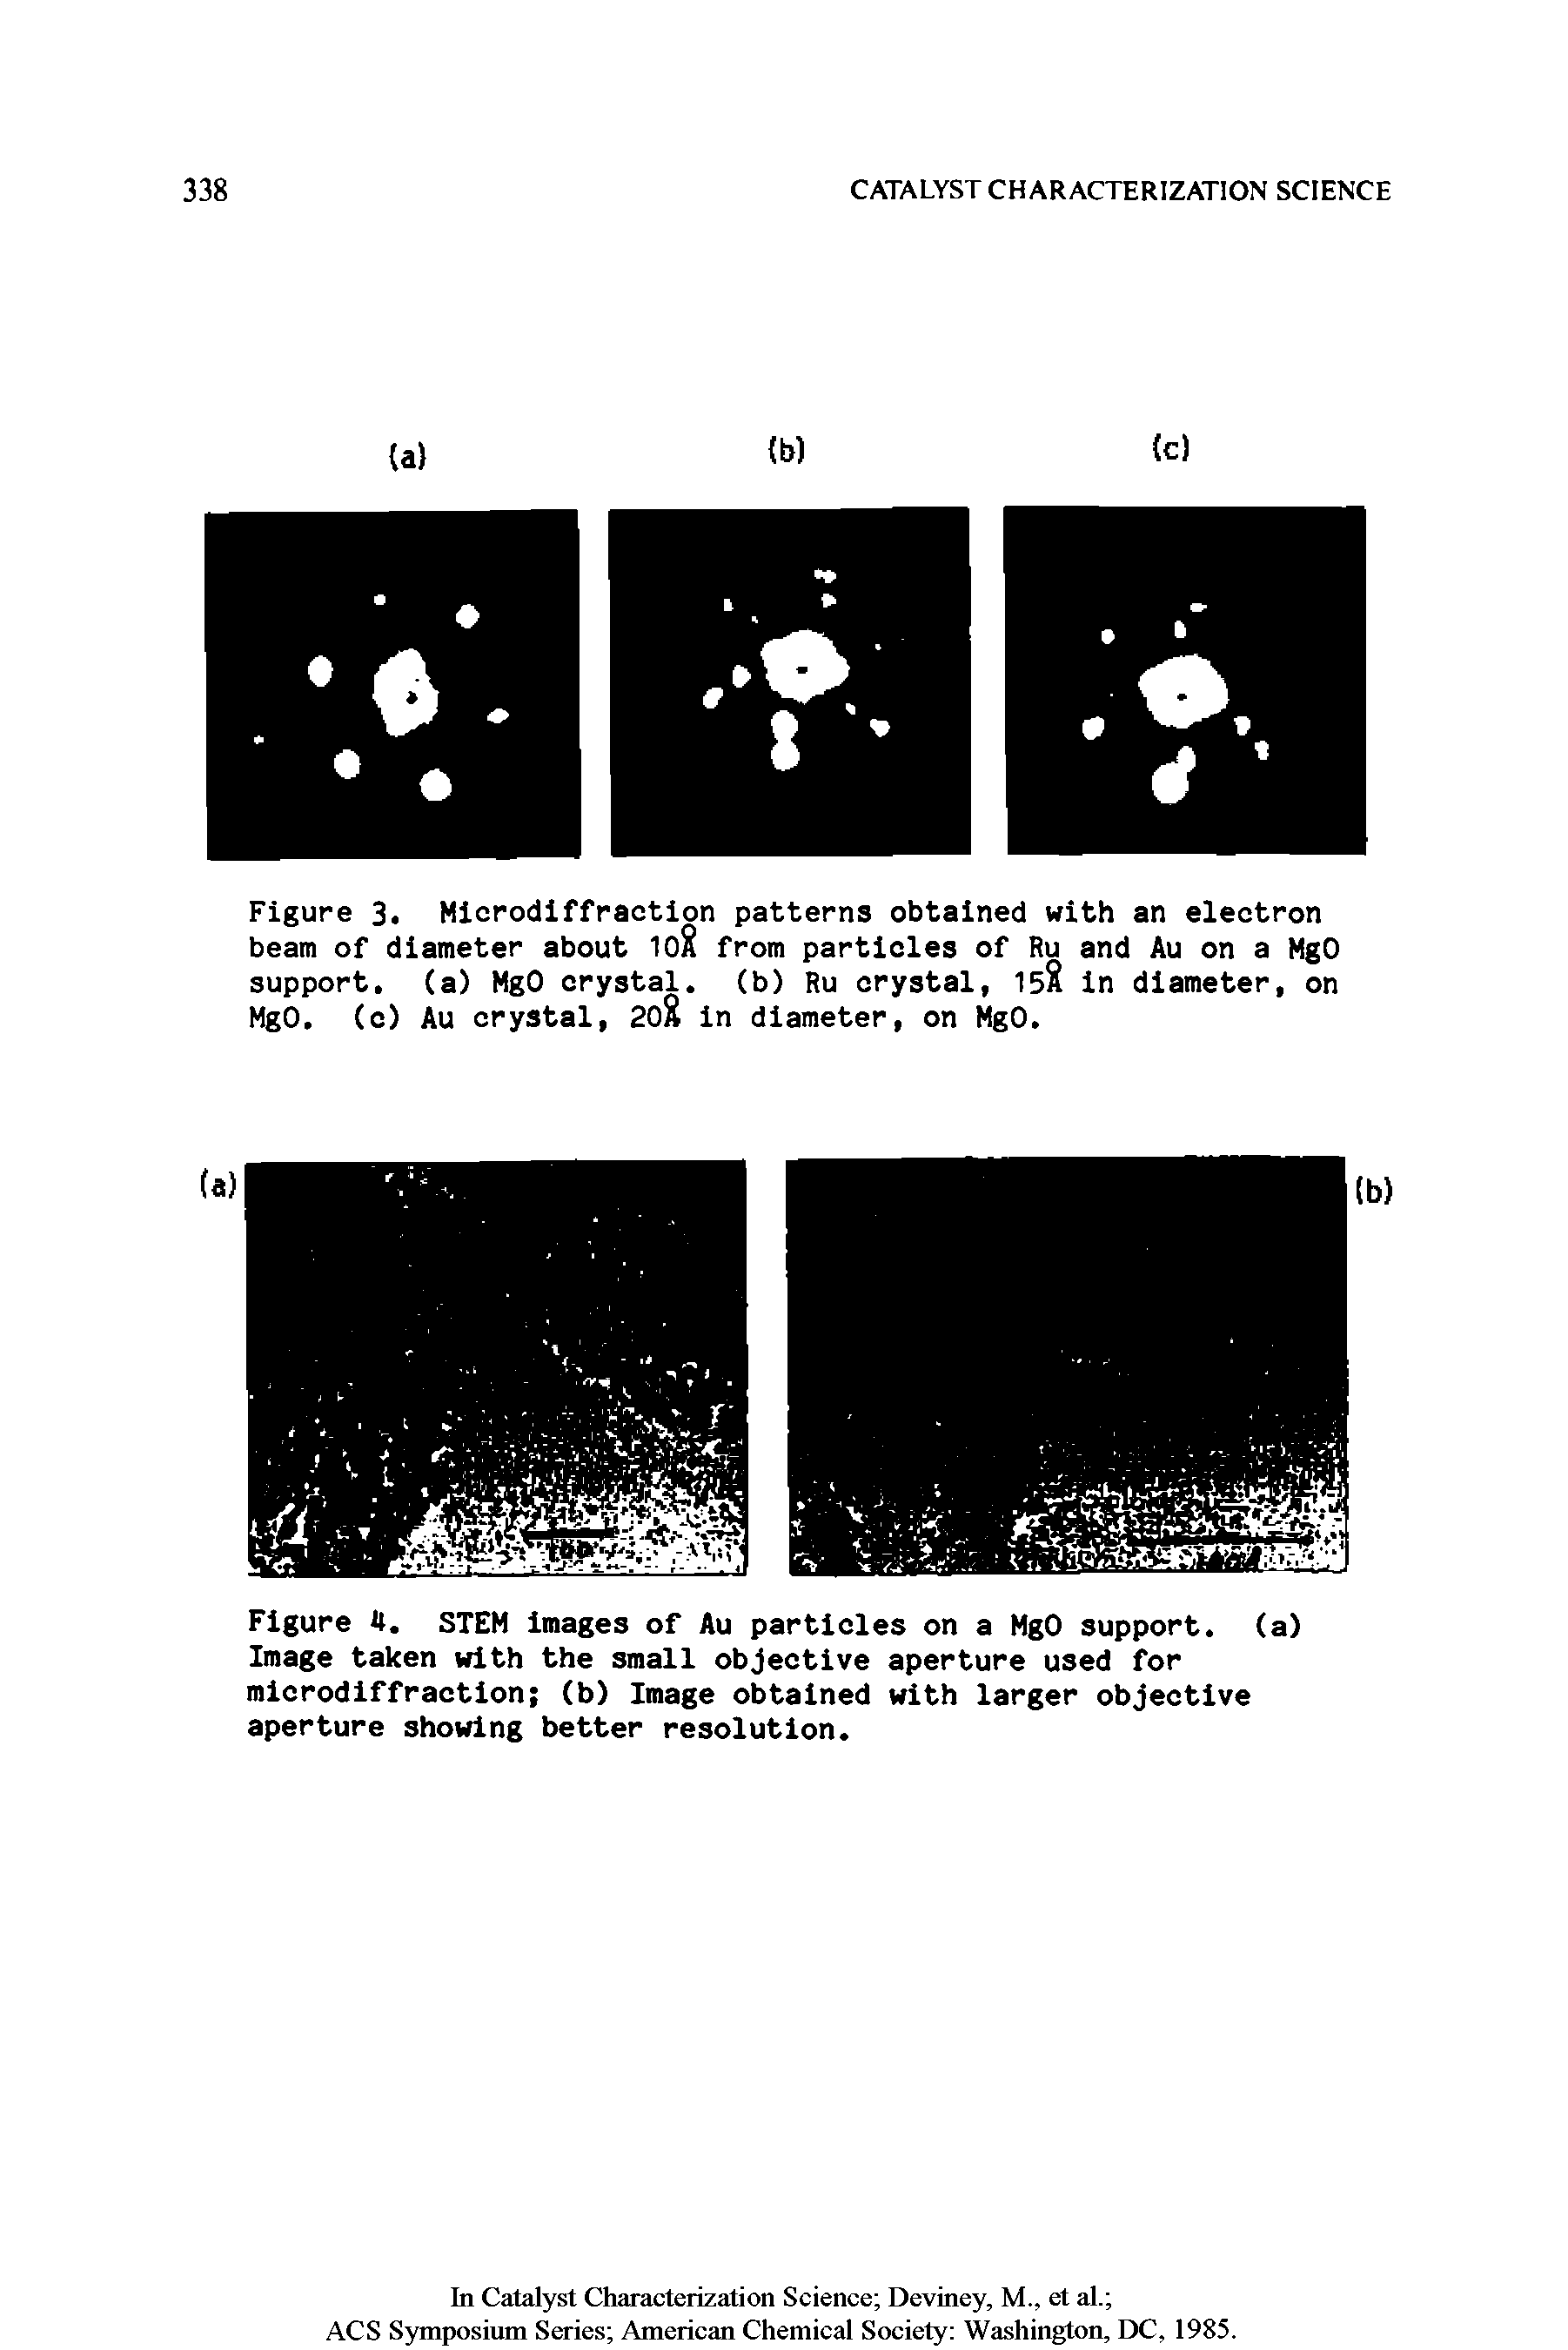 Figure 3. Microdiffraction patterns obtained with an electron beam of diameter about 1o8 from particles of Ru and Au on a MgO support, (a) MgO crystal, (b) Ru crystal, is2 in diameter, on MgO. (c) Au crystal, 20A in diameter, on MgO.